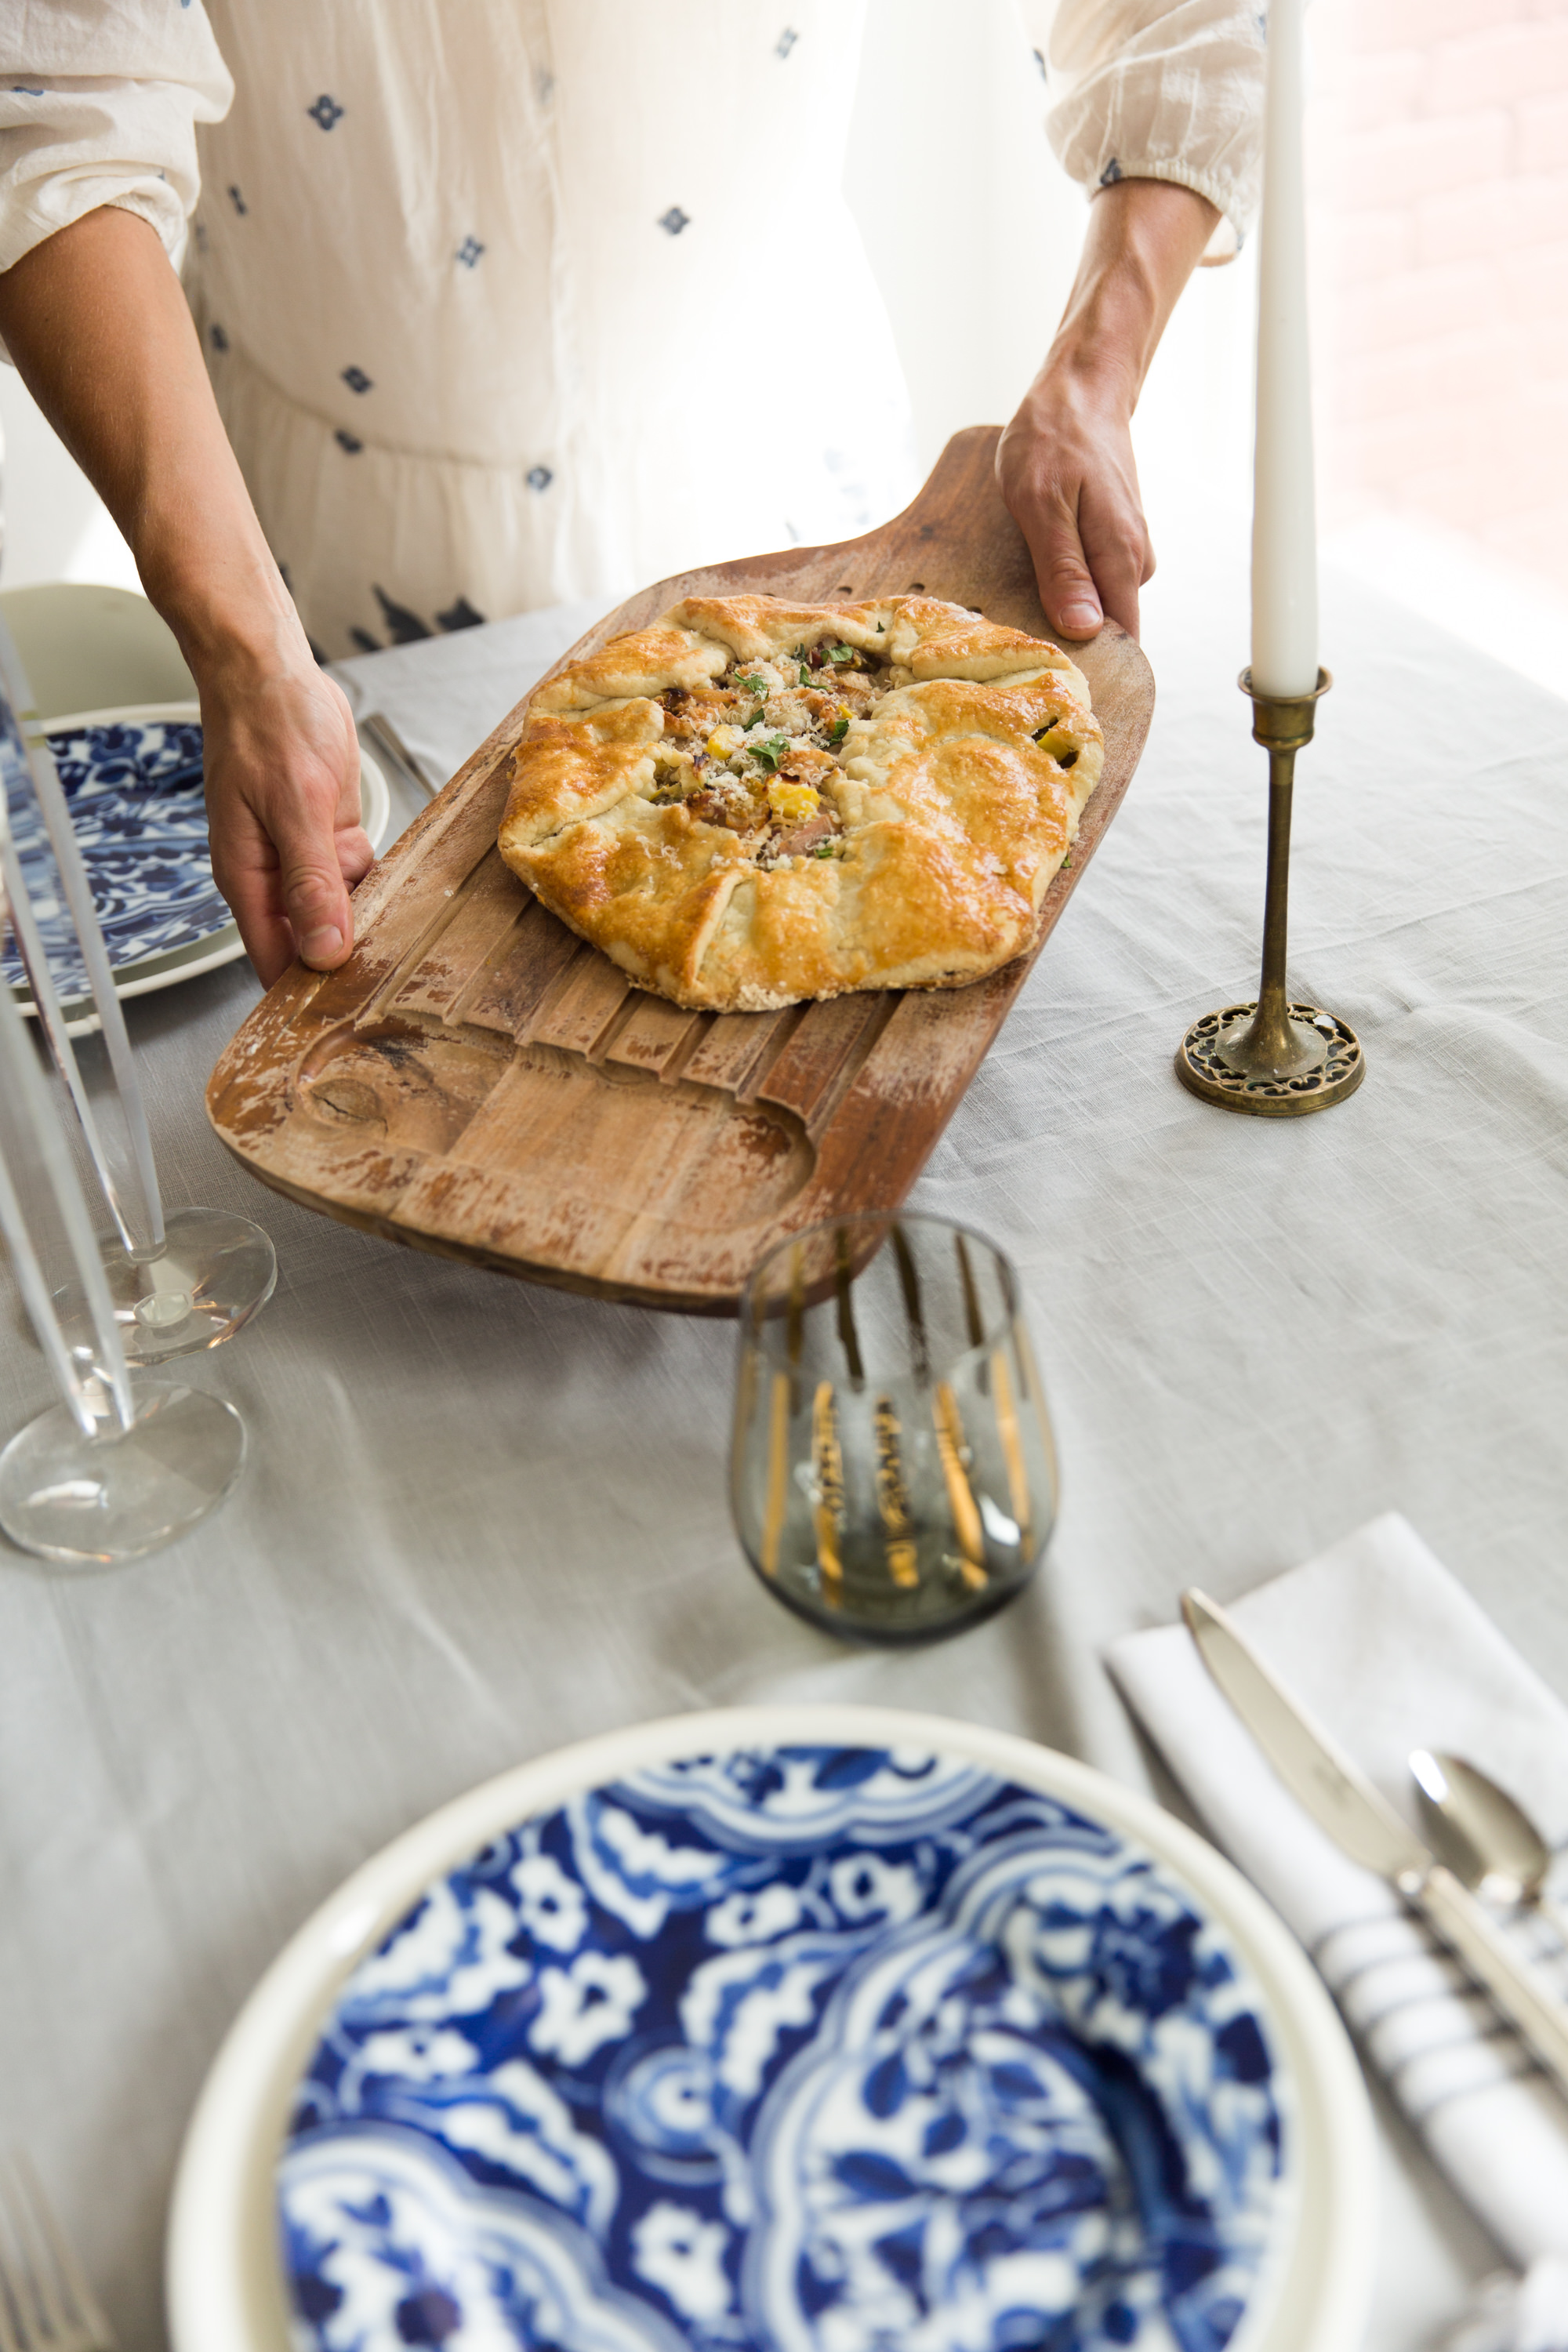 Placing Galette On Table